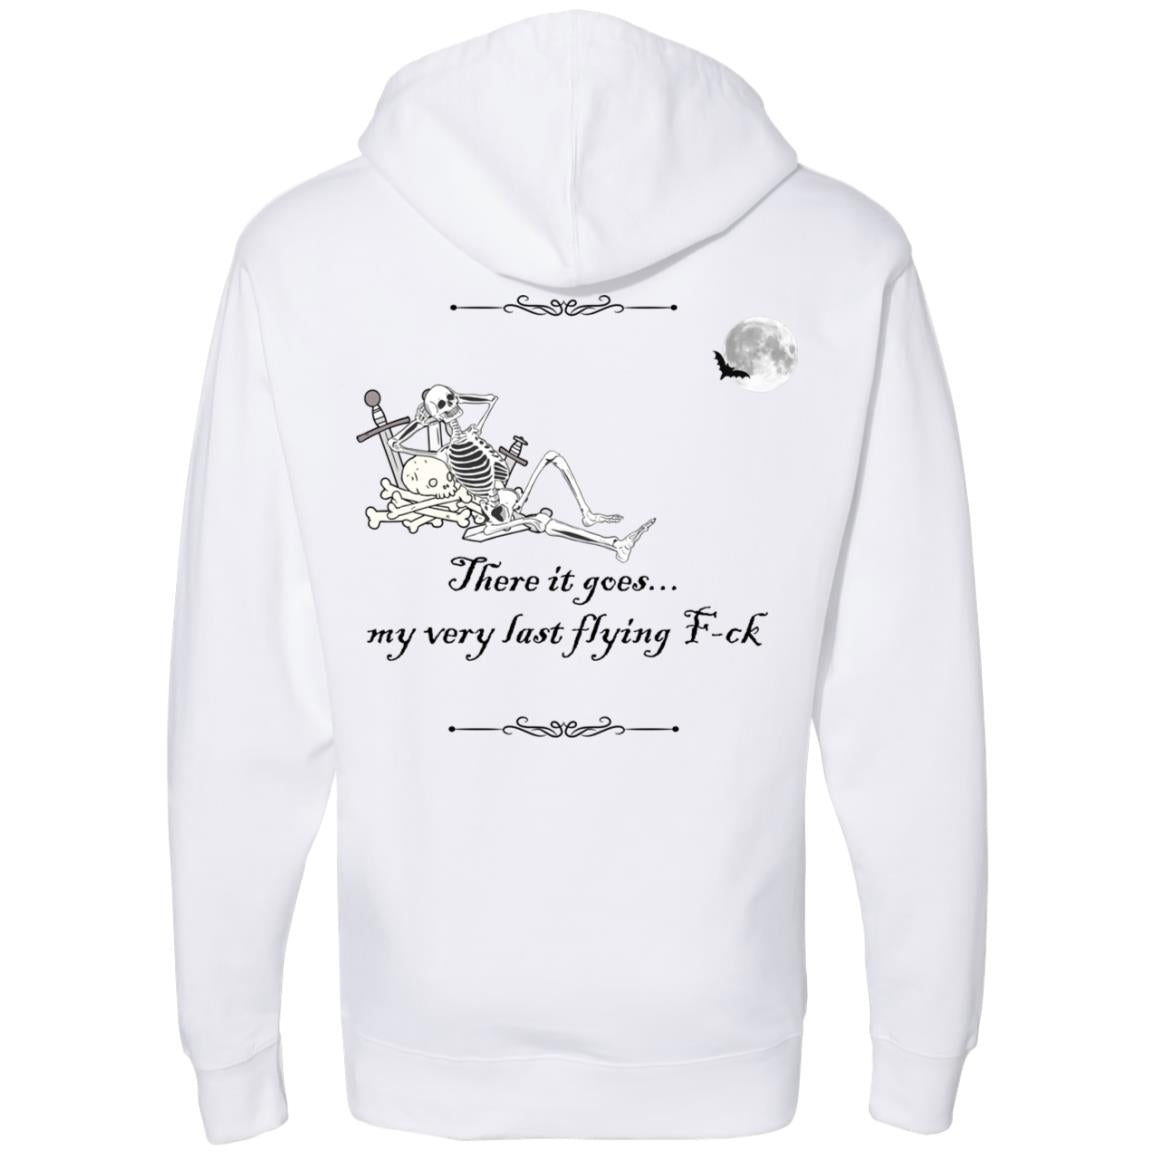 There it goes... my very last flying F-uck sweatshirt template (2) SS4500 Midweight Hooded Sweatshirt